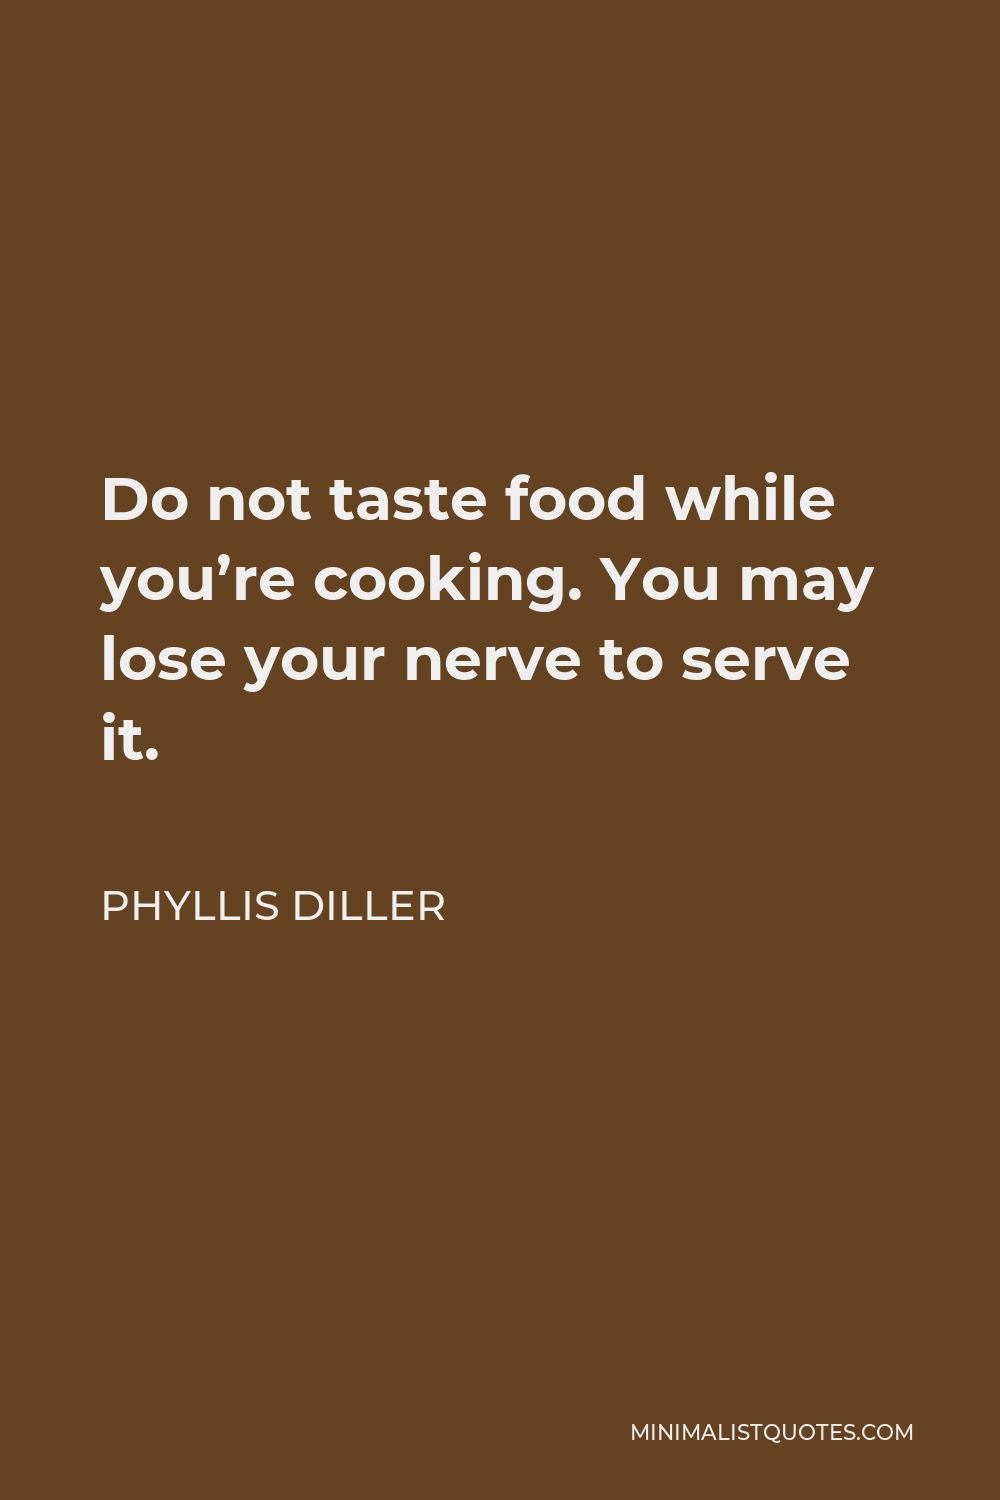 Phyllis Diller Quote - Do not taste food while you’re cooking. You may lose your nerve to serve it.